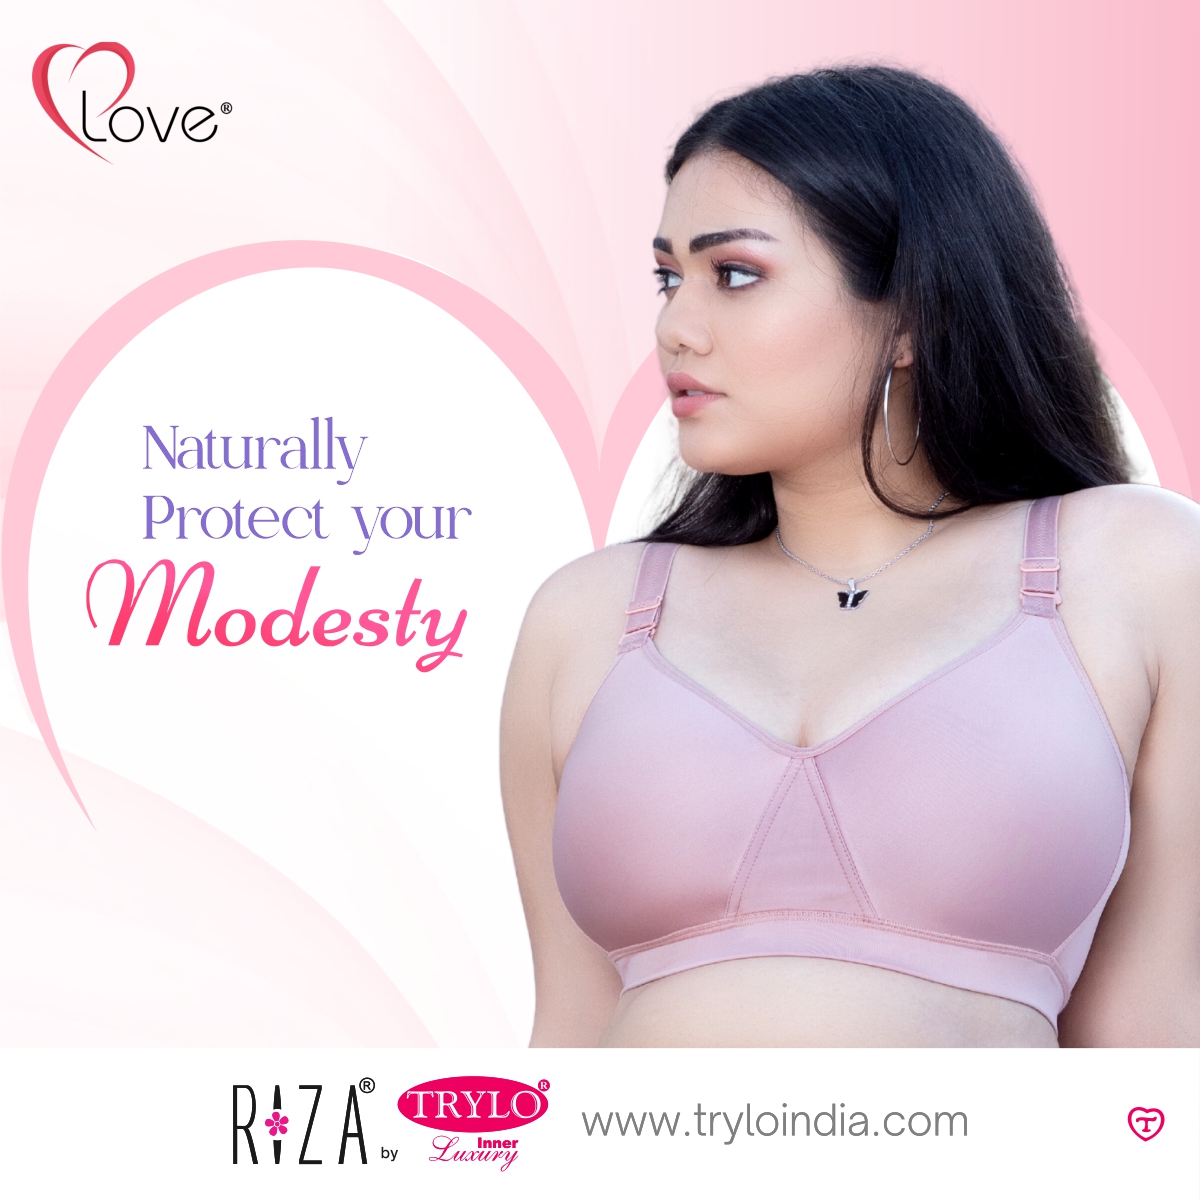 Trylo Intimates on X: Experience unparalleled comfort and confidence with Riza  Minimizer. Product shown-Riza Minimizer #TryloIndia #TryloIntimates  #RizaIntimates #RizabyTrylo #RizaMinimizer #ComfortAndConfidence  #SleekSilhouette